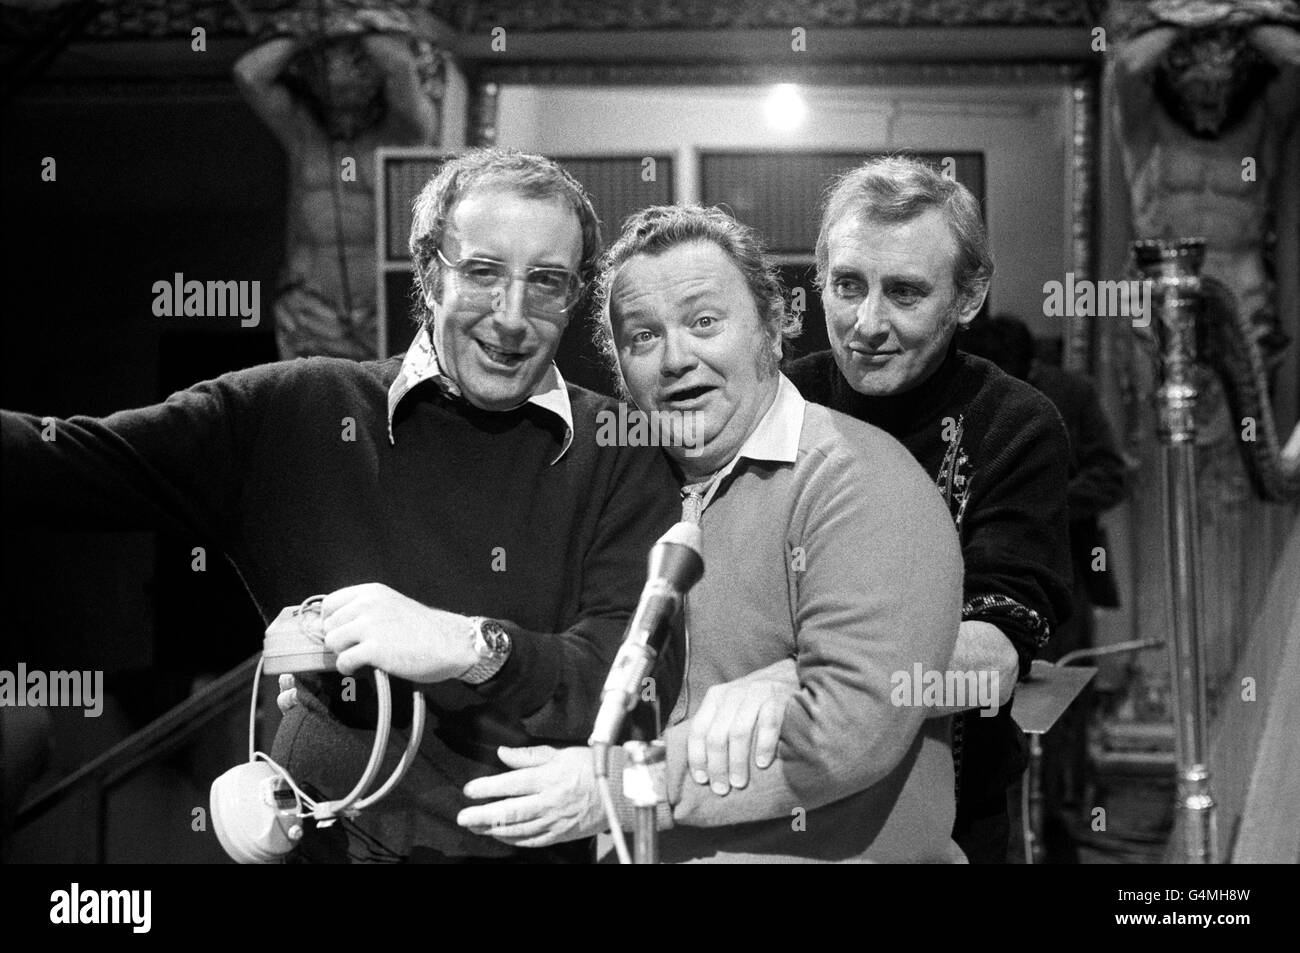 (L-R) Peter Sellers, Harry Secombe and Spike Milligan, the original 'Goons', back together again for the first time in 12 years, especially for the BBC's 50th anniversary celebrations. Stock Photo